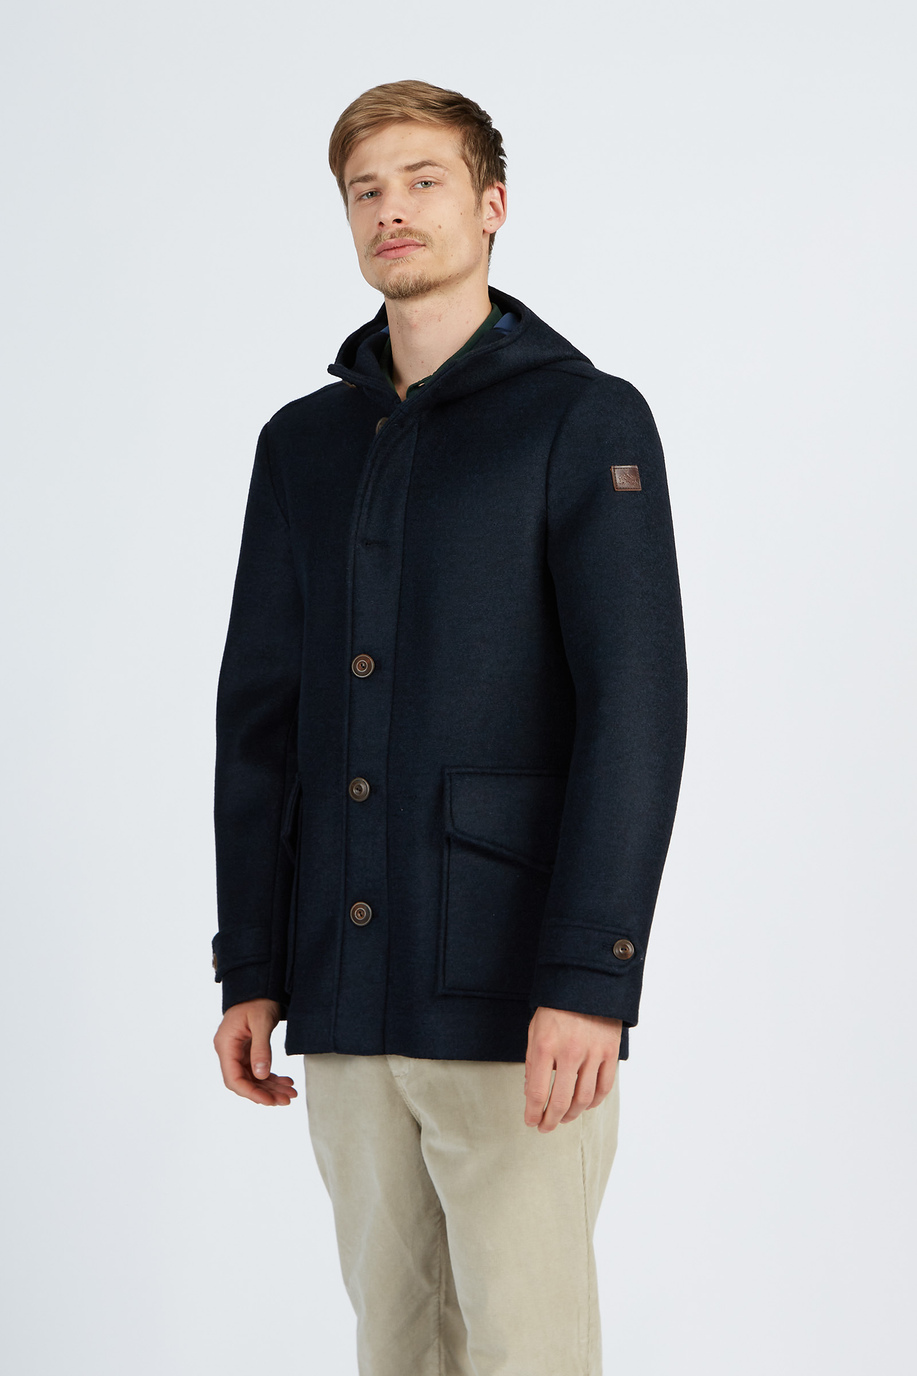 Leyendas Del Polo men’s wool blend jacket with buttons regular fit - Outerwear and Jackets | La Martina - Official Online Shop